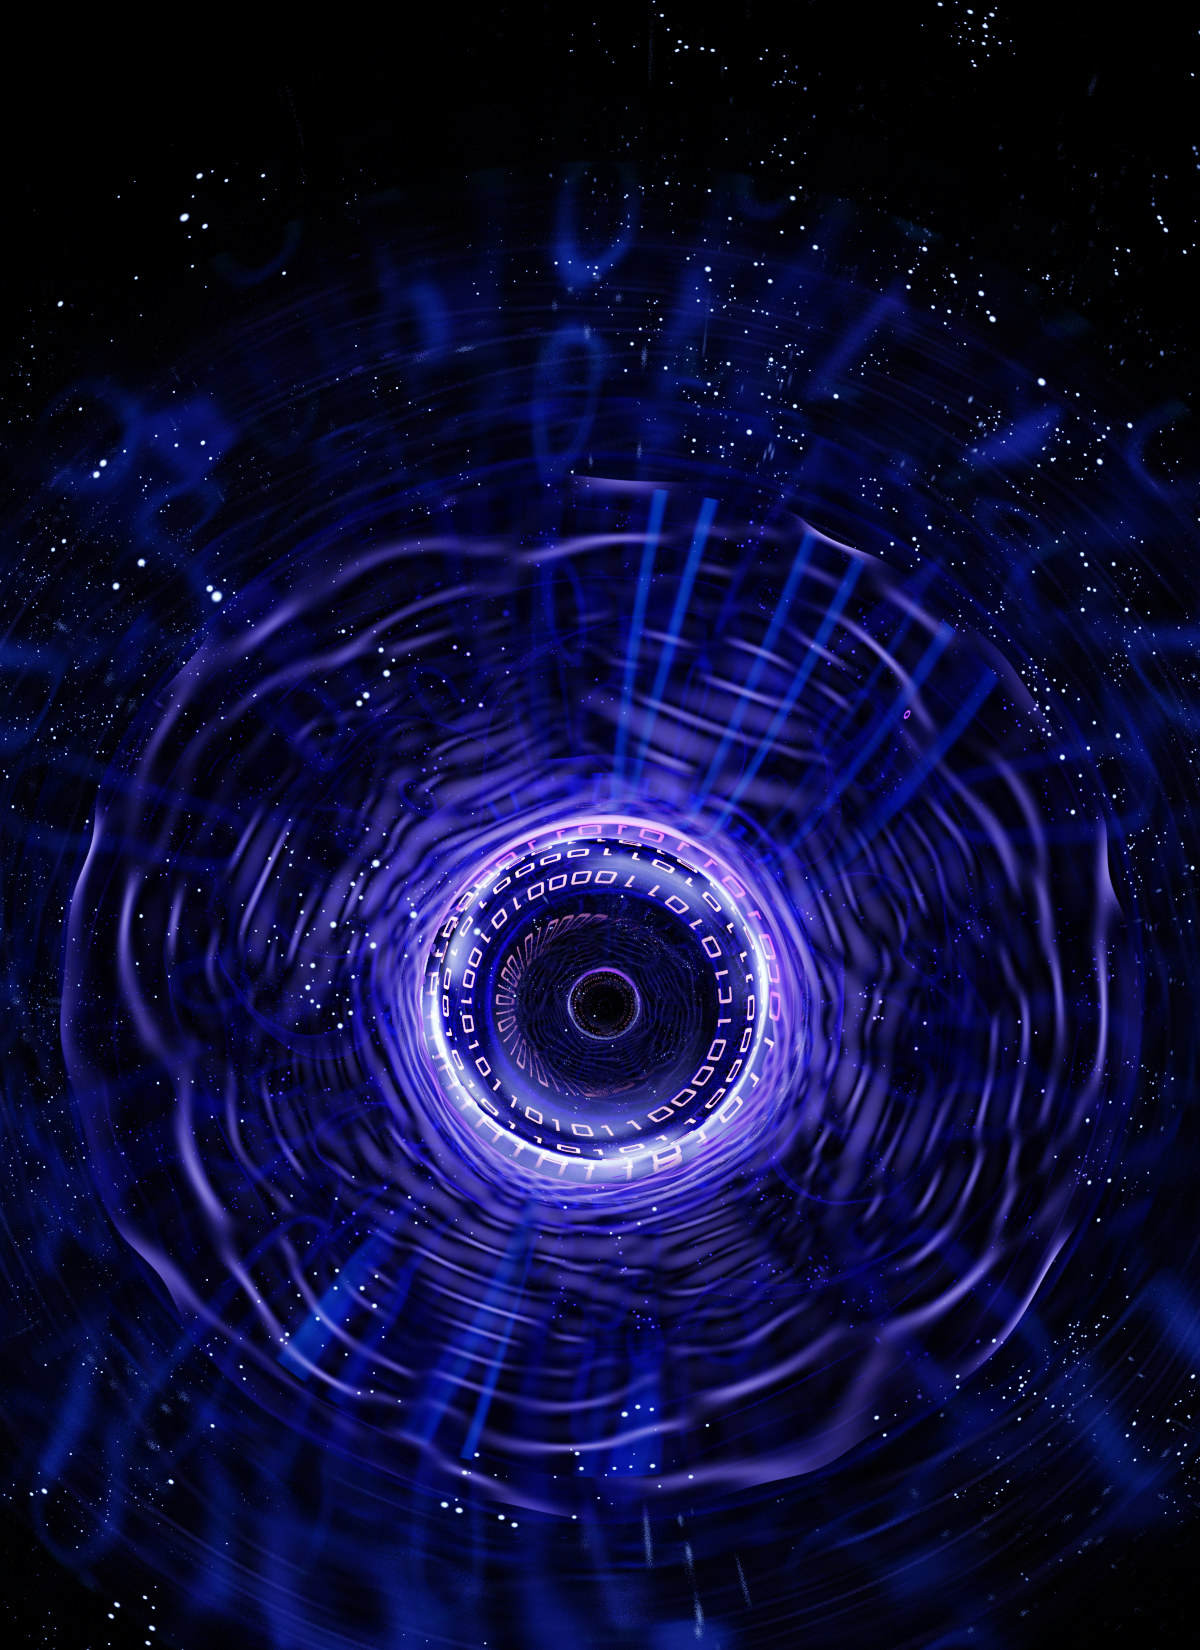 A colorful blue, swirling circle in a midst of black made of digital numbers